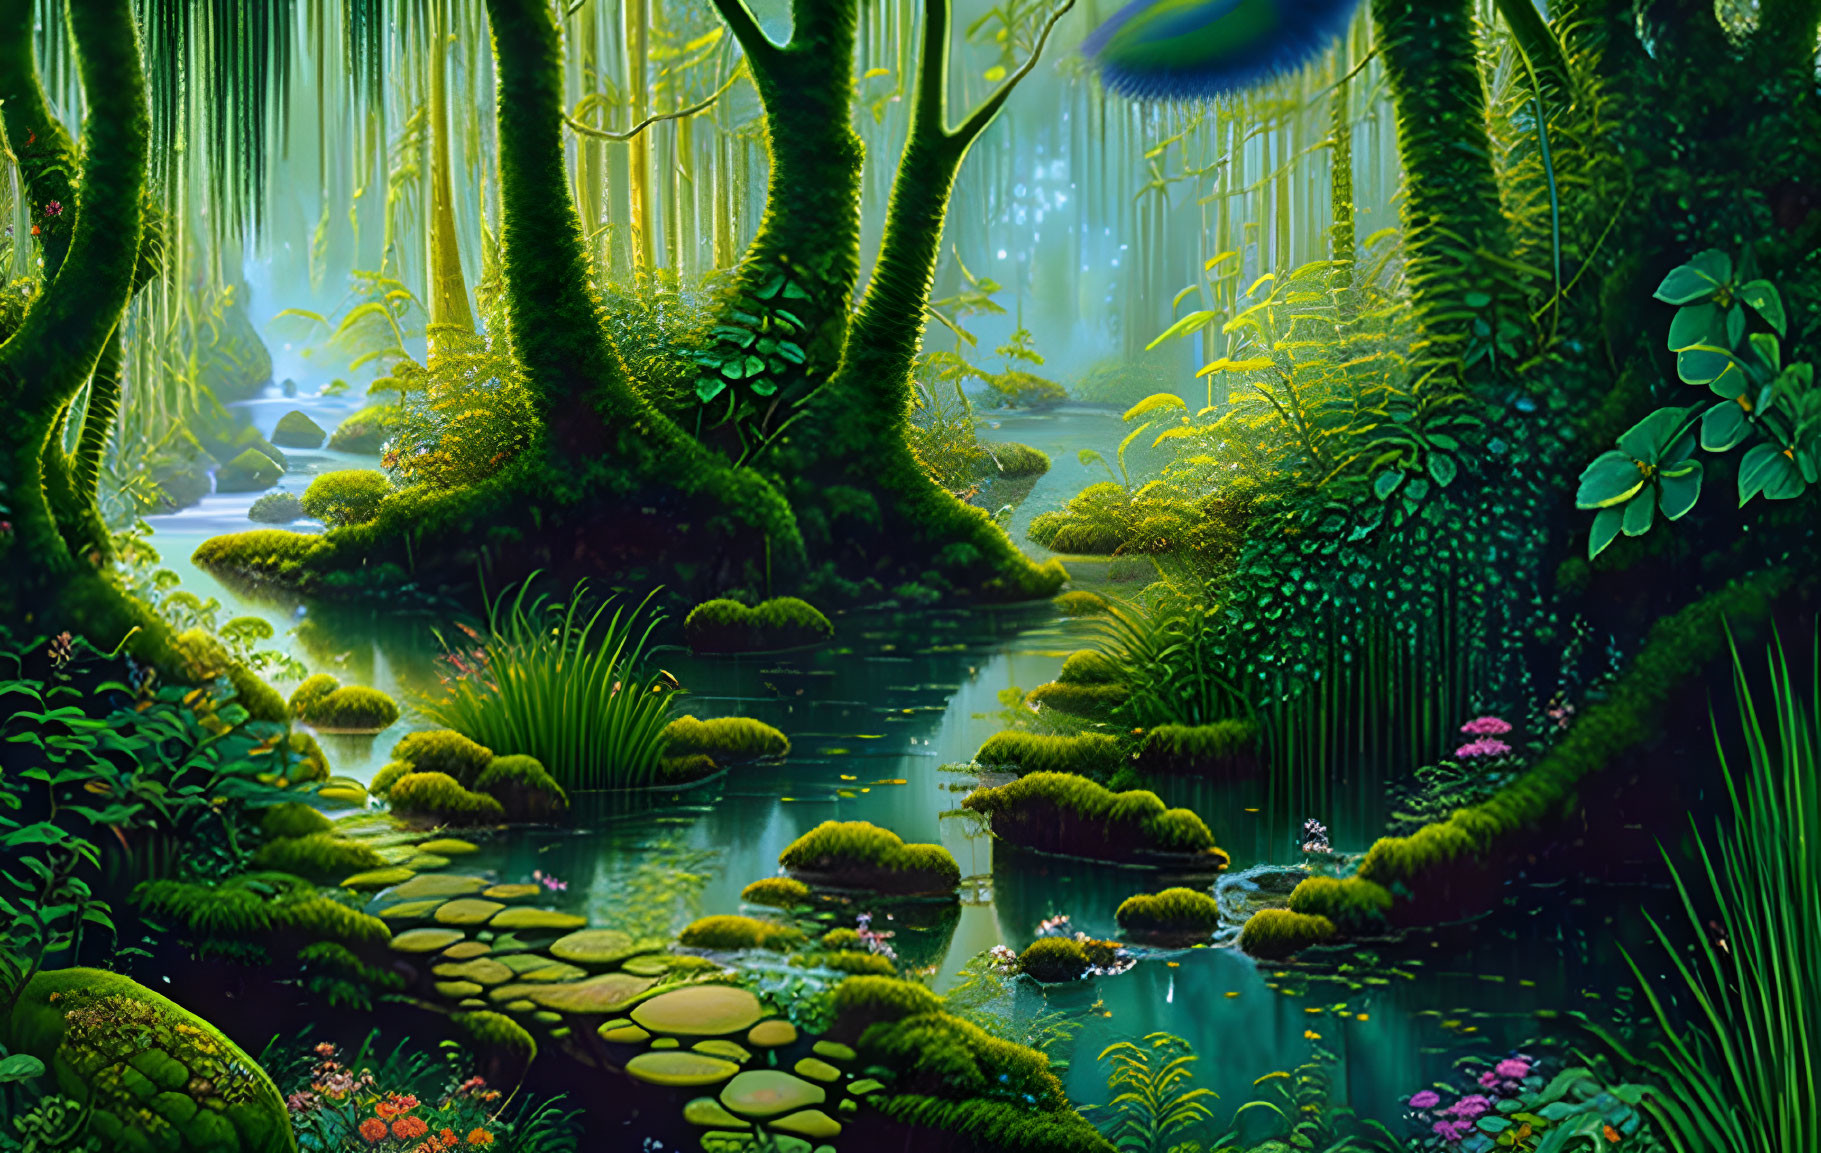 Serene forest with stream, greenery, stepping stones, and glowing lights.